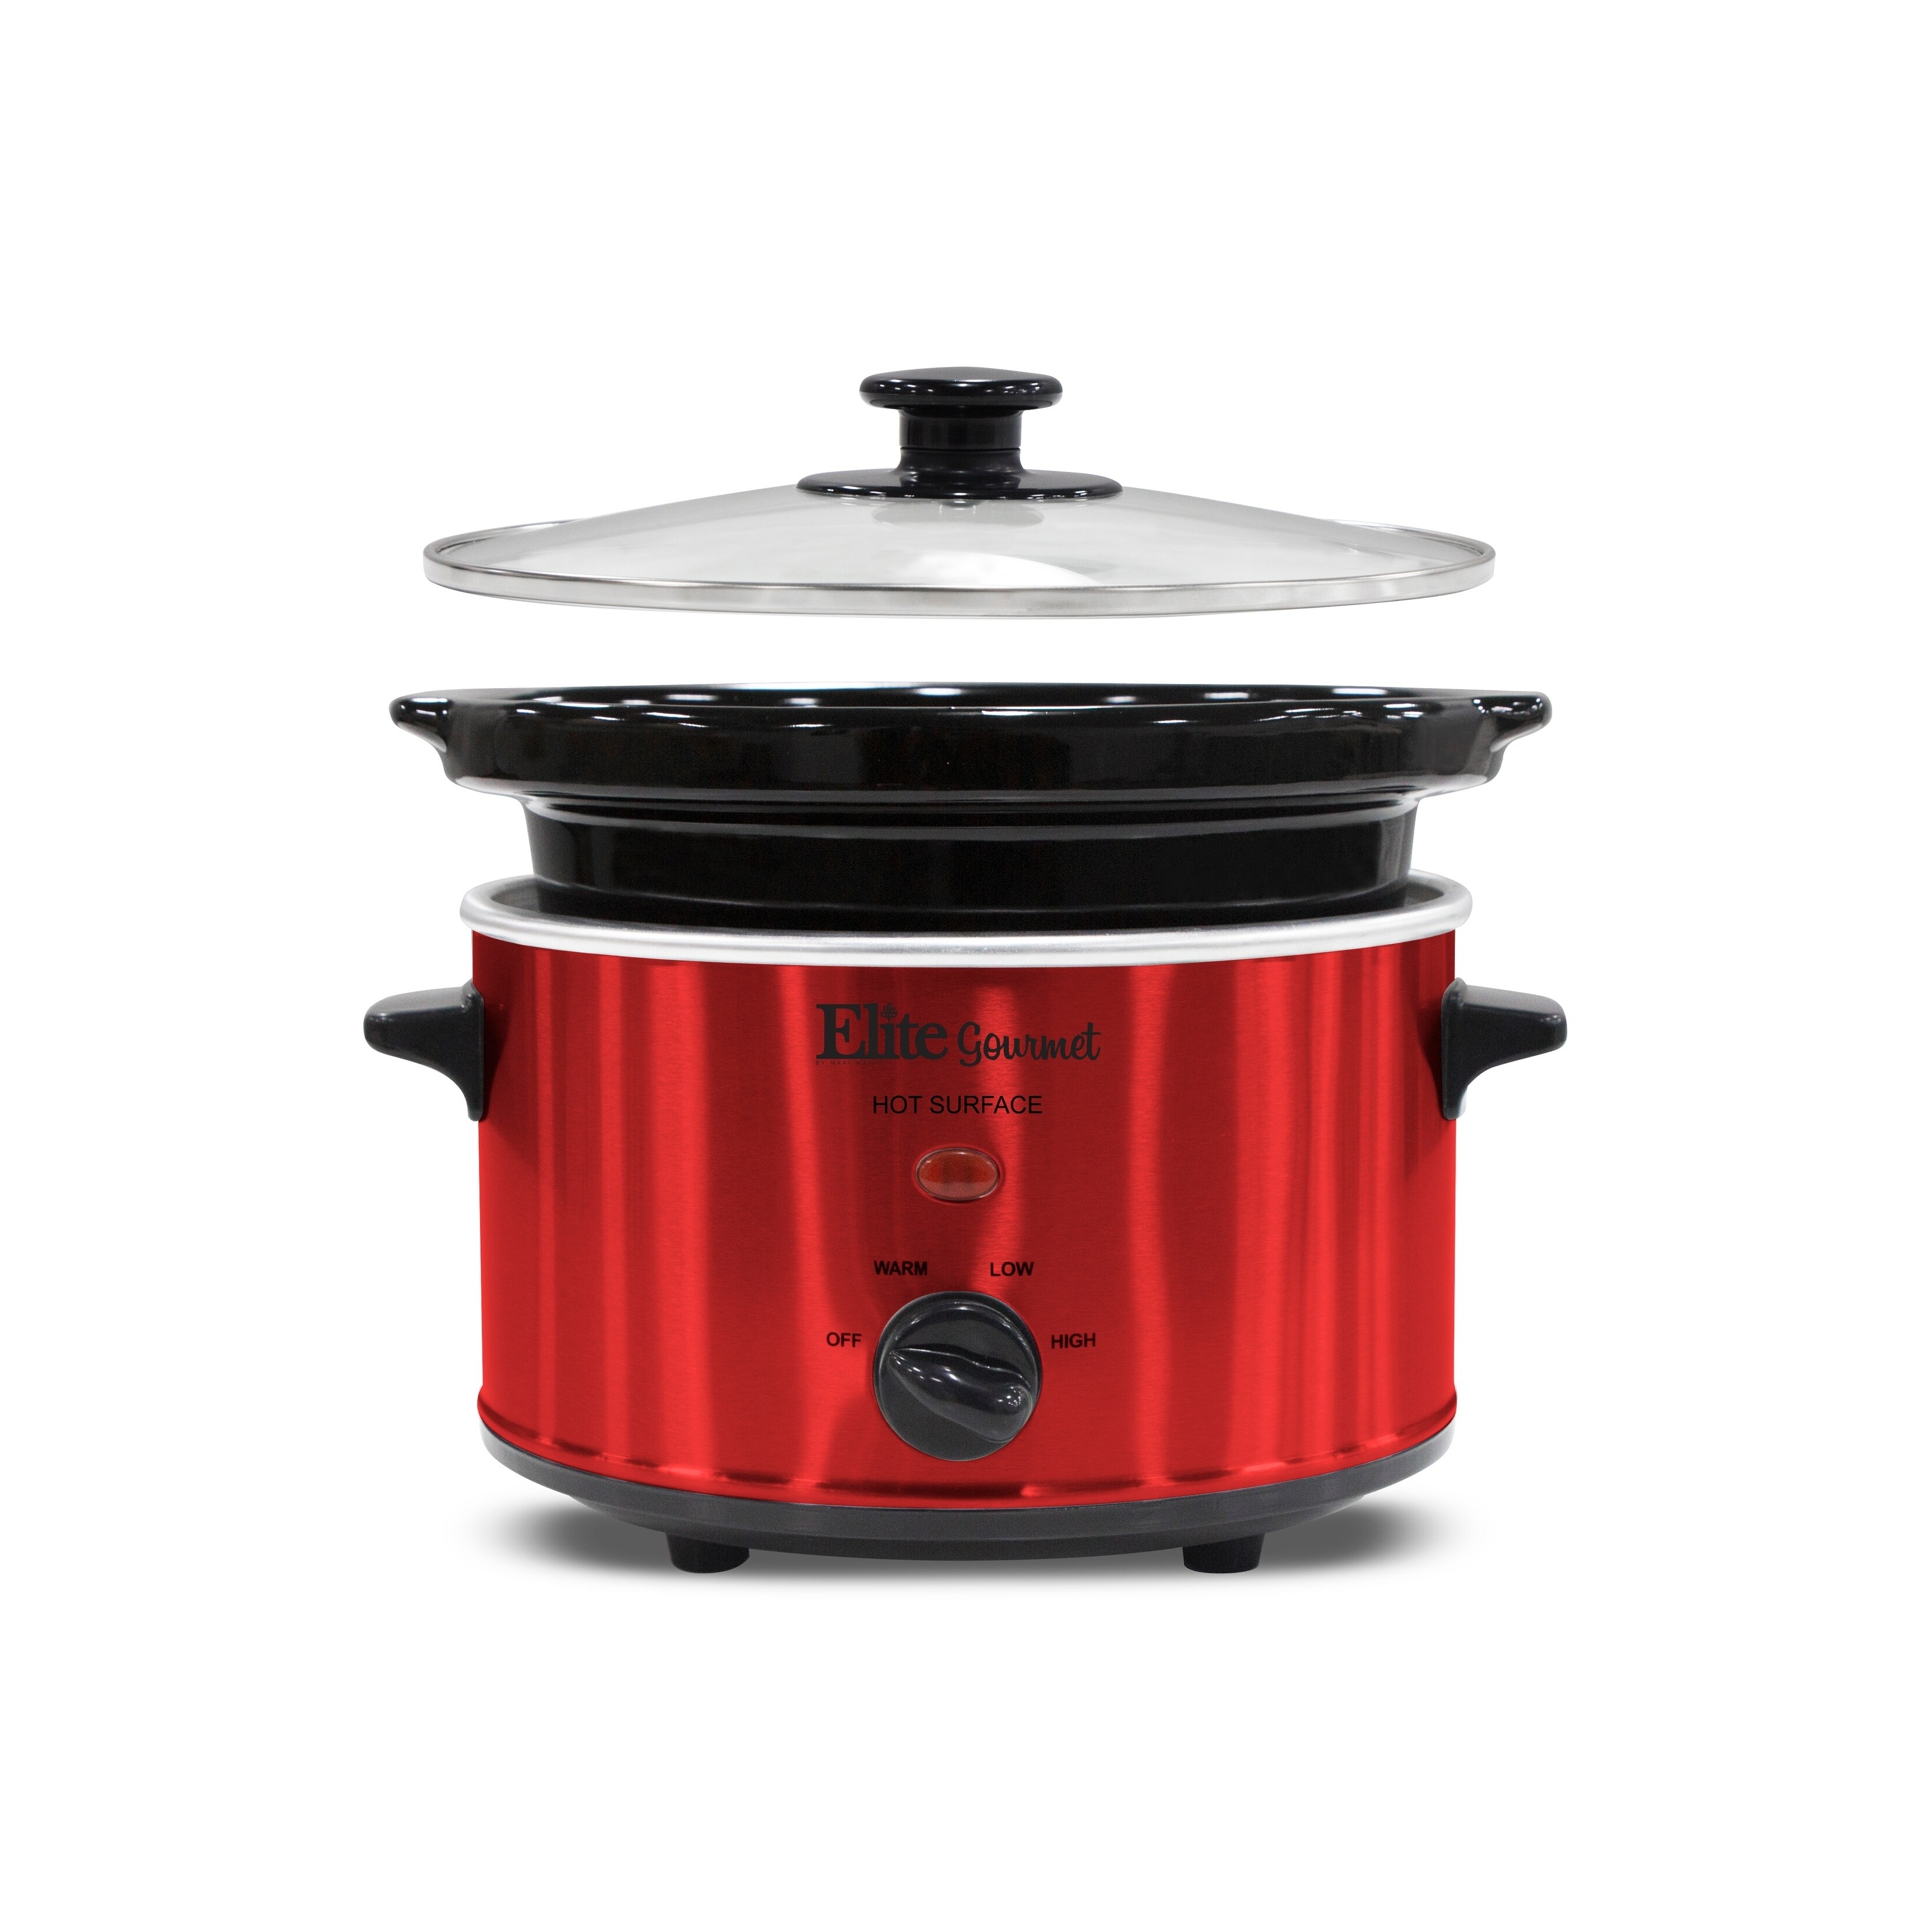 https://ak1.ostkcdn.com/images/products/22018222/Elite-Gourmet-MST-275XR-2-Quart-Oval-Slow-Cooker-Red-95ace504-9c93-4224-b383-a69f7265002a.jpg